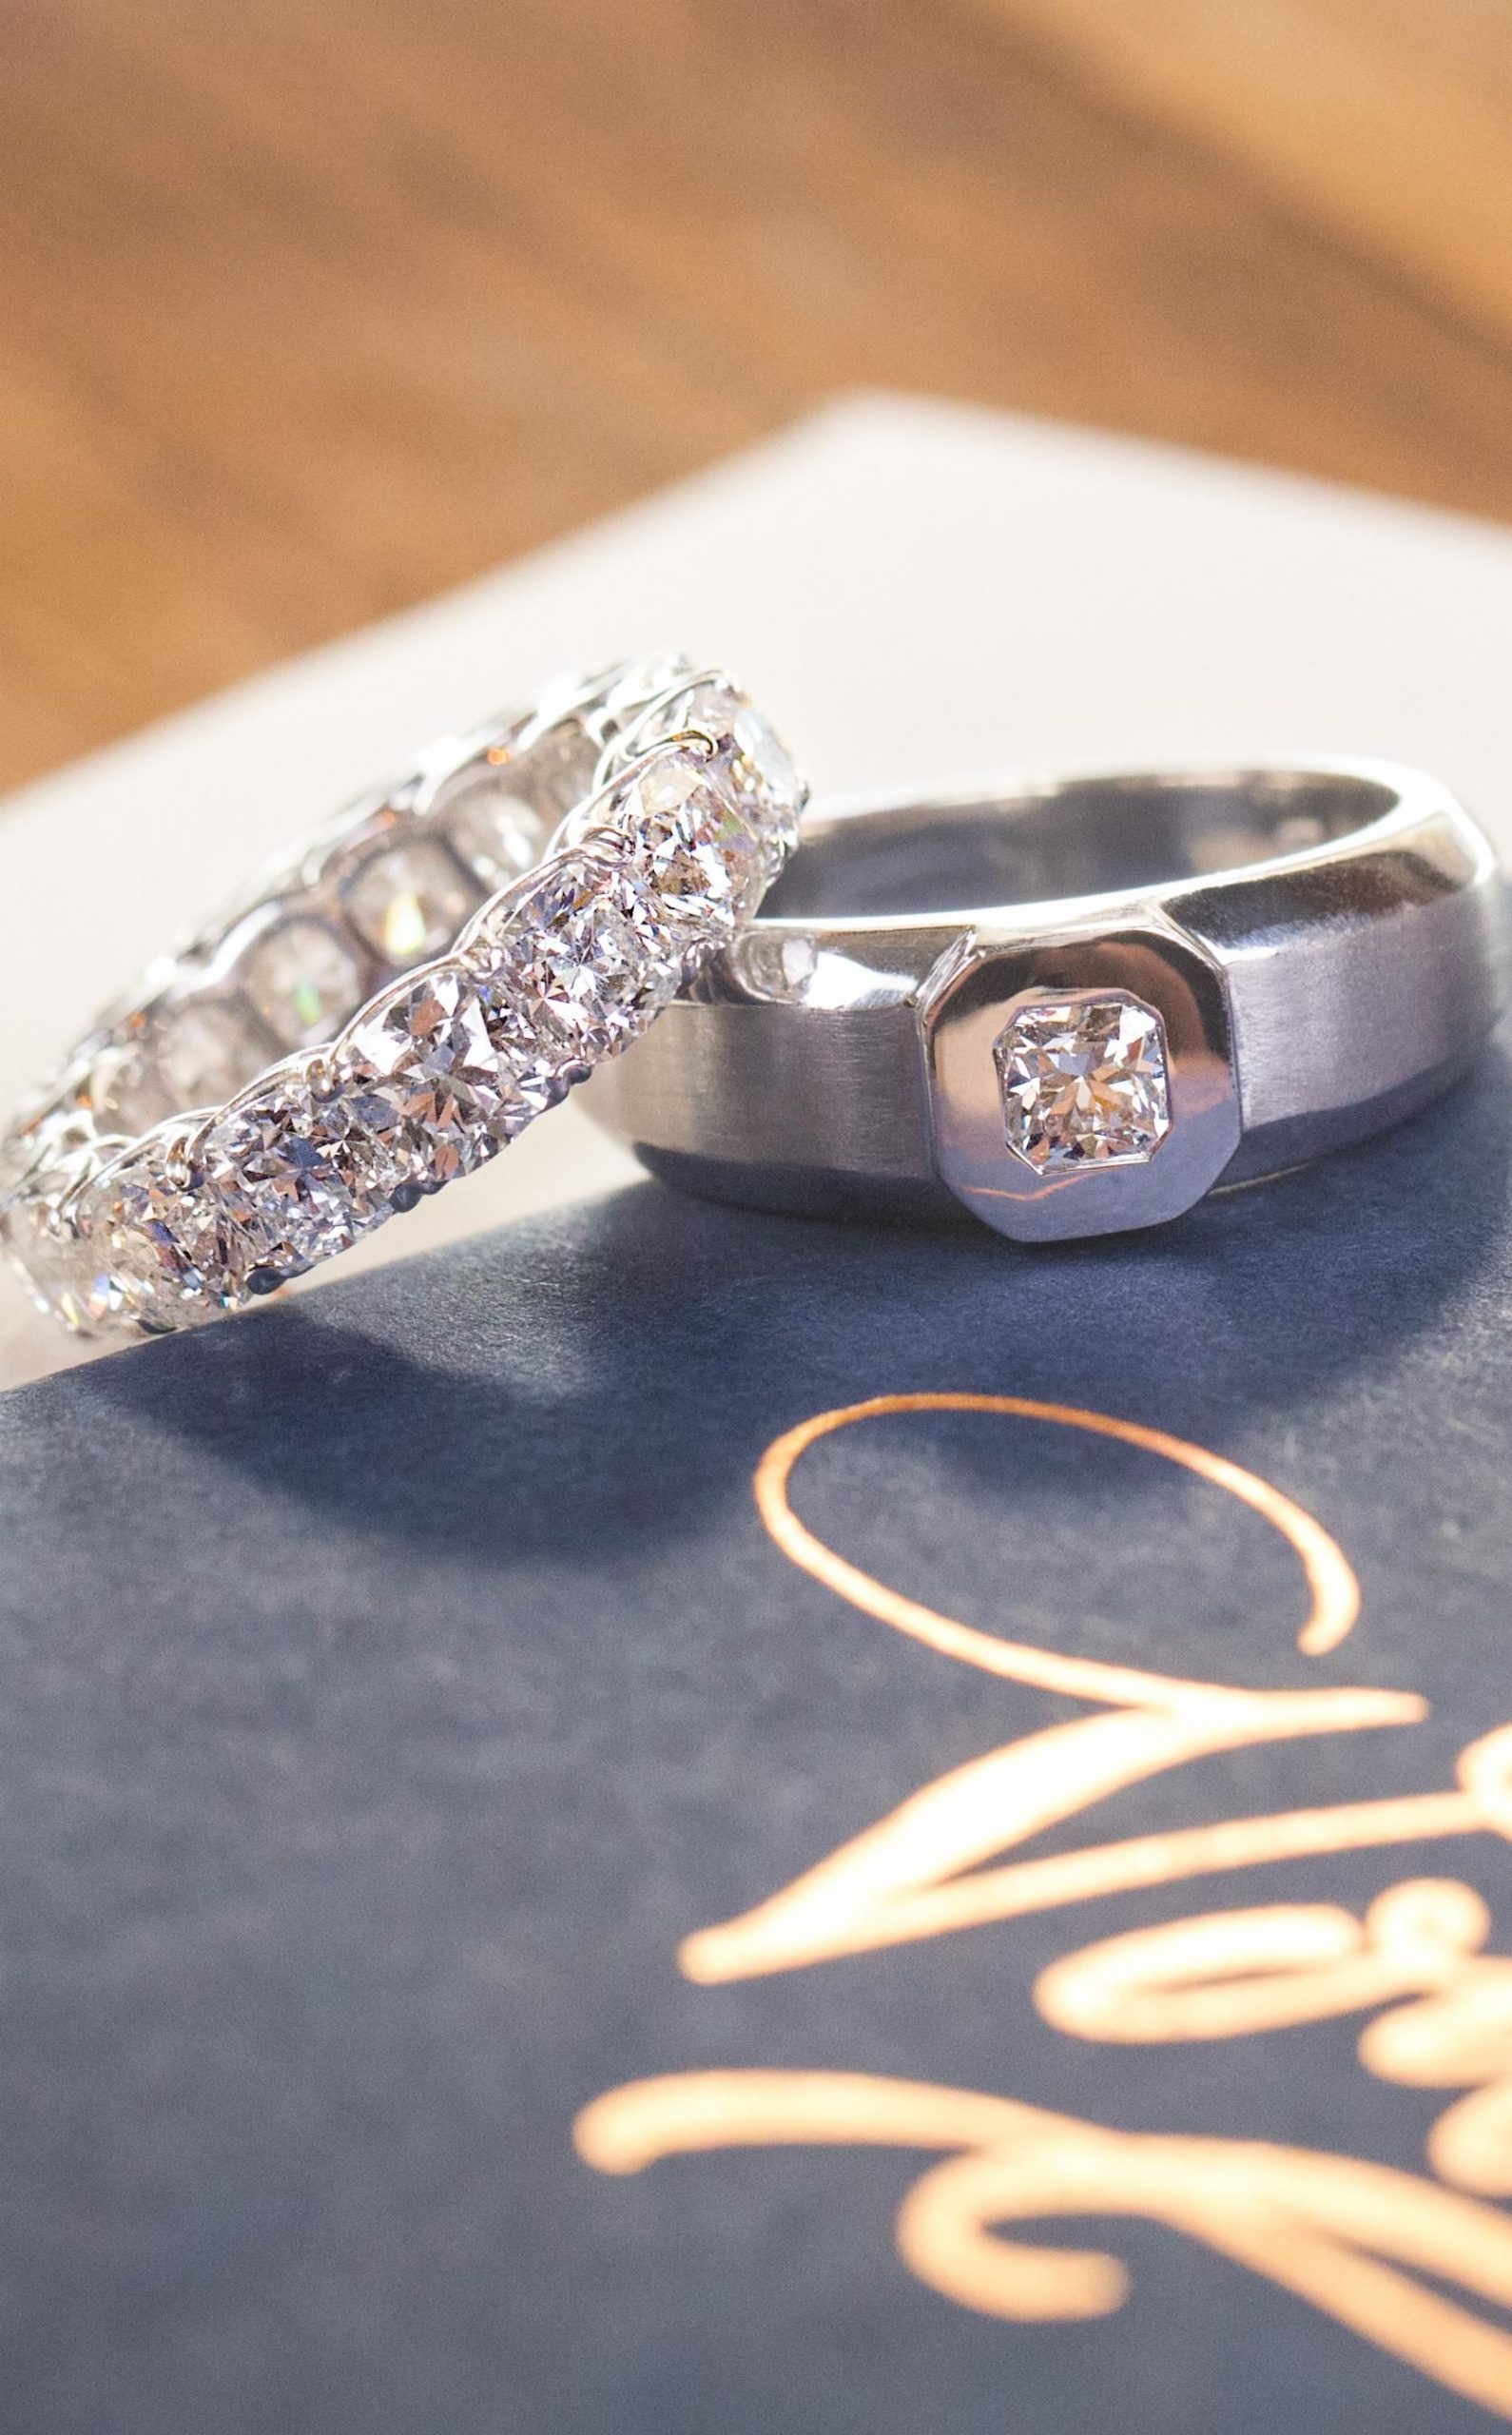 Uncover true romance with a pair of diamond wedding rings ...